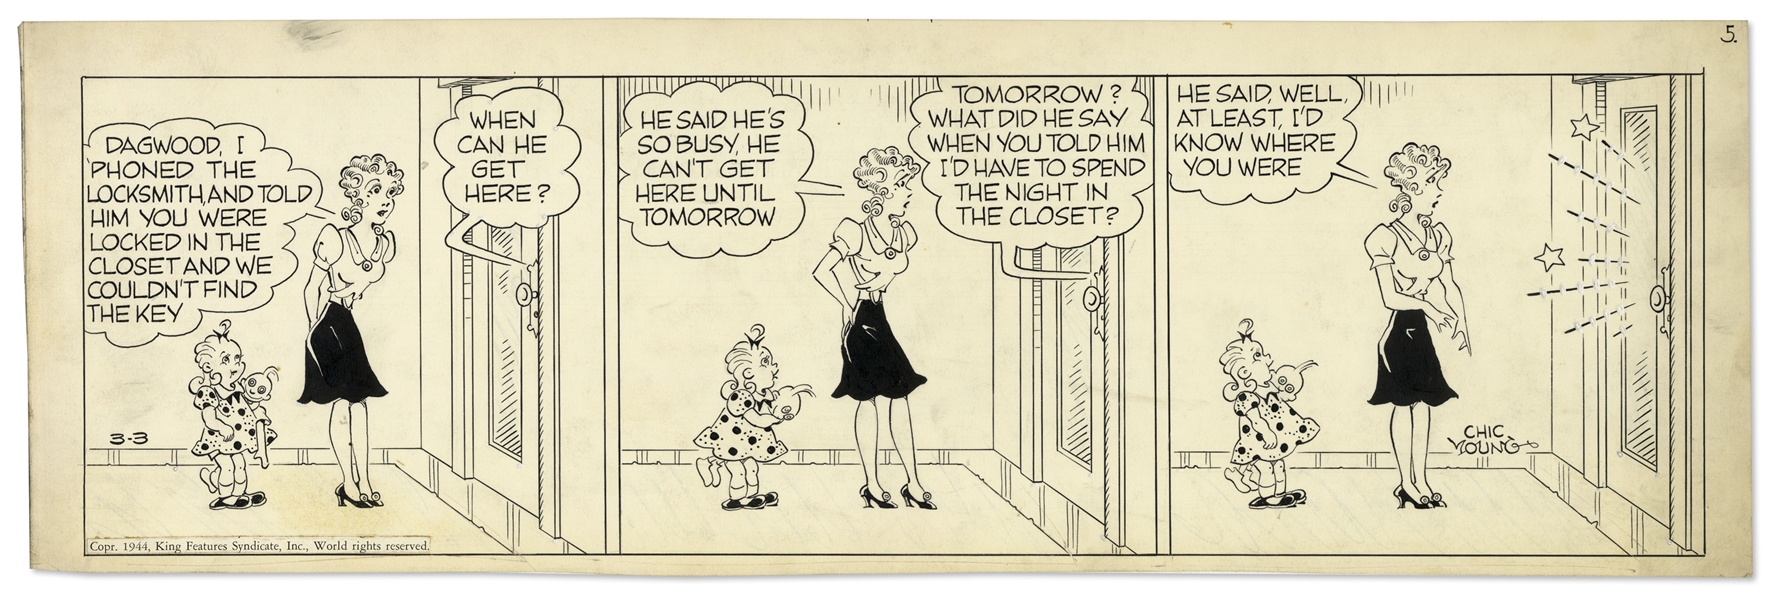 Chic Young Hand-Drawn ''Blondie'' Comic Strip From 1944 Titled ''The Family Skeleton''